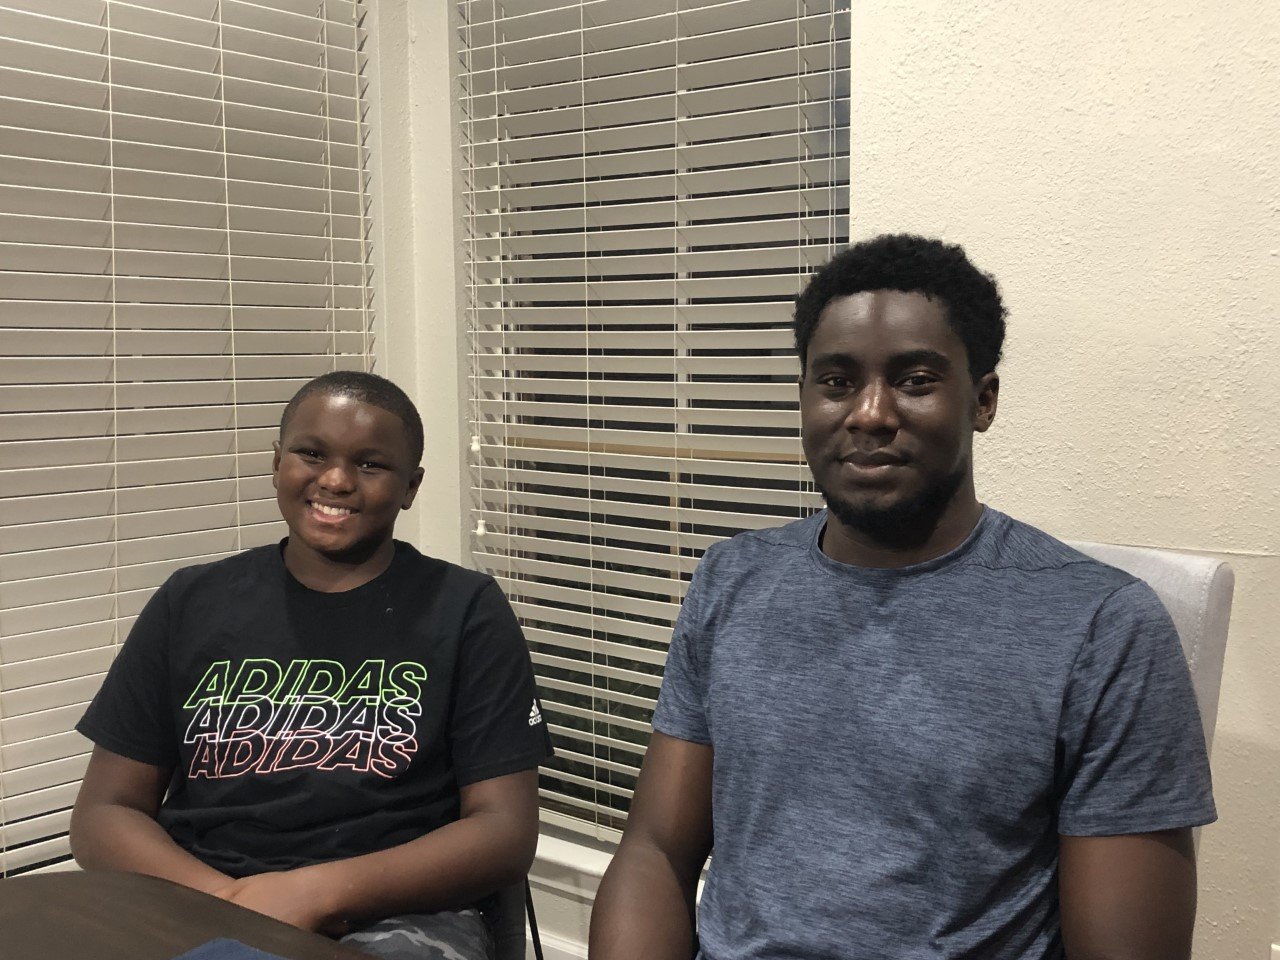 Julian and Jaylan Gray share their story of perseverance. They are sitting at their mother’s table, which was restored, along with their house, after flood and winter storm damage.